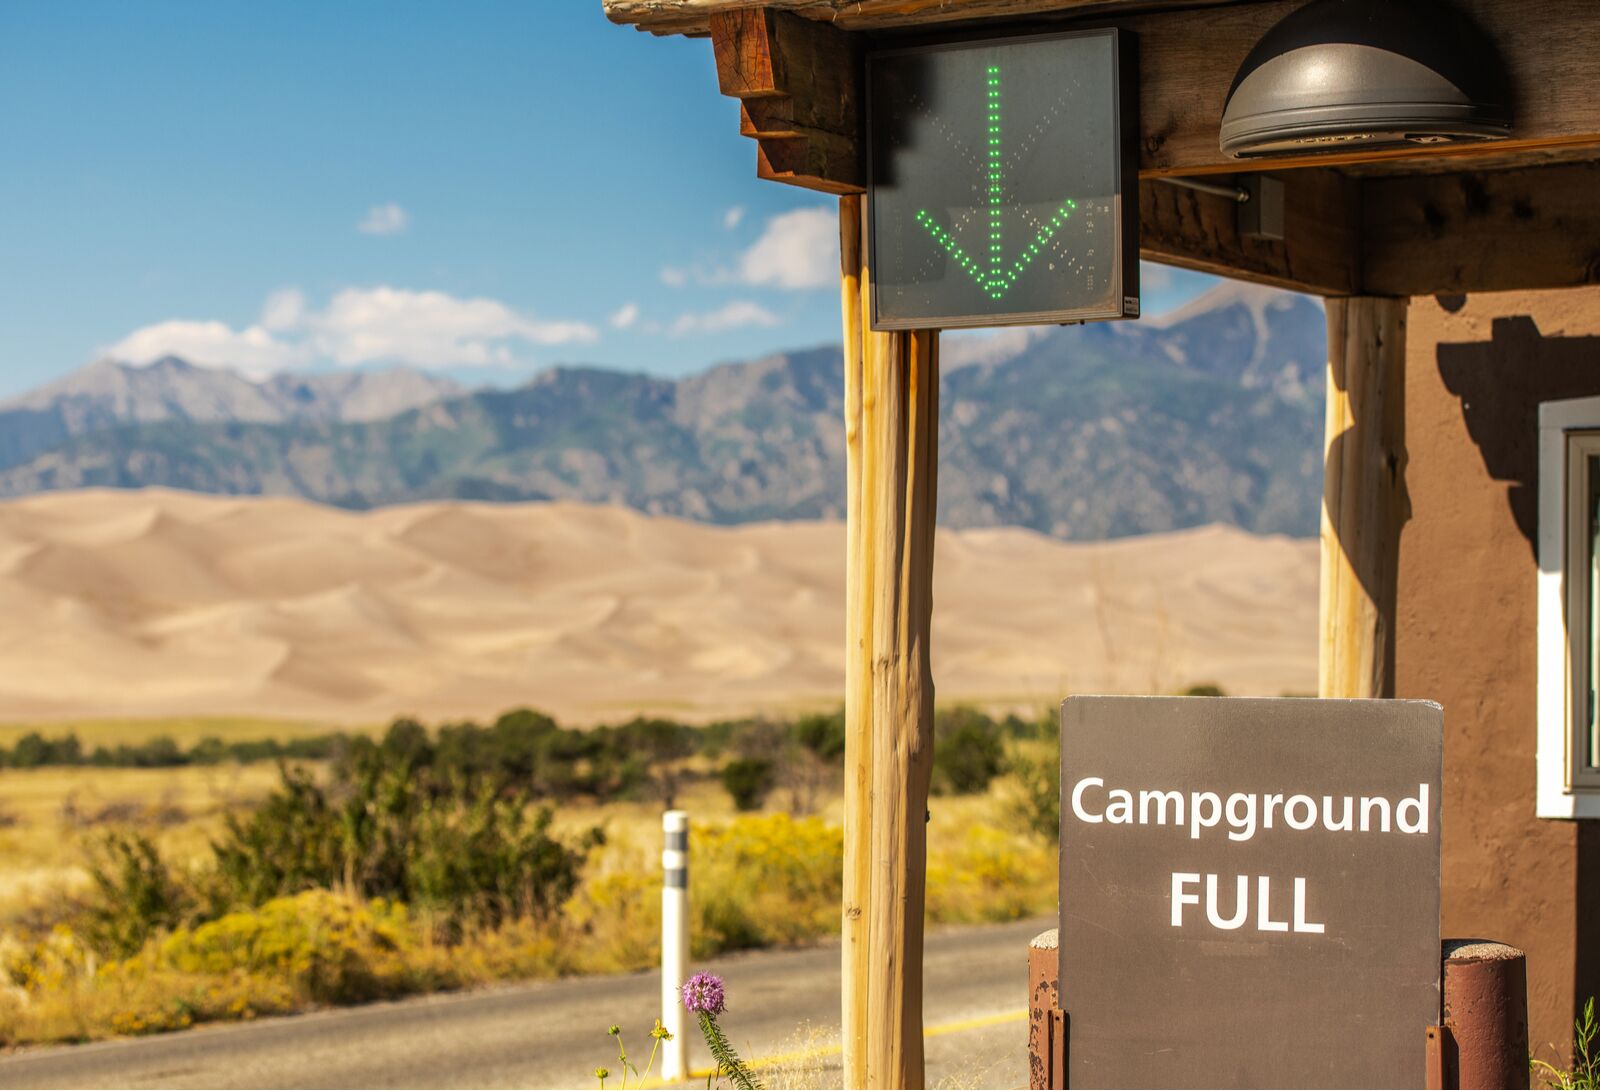 Full campground sign